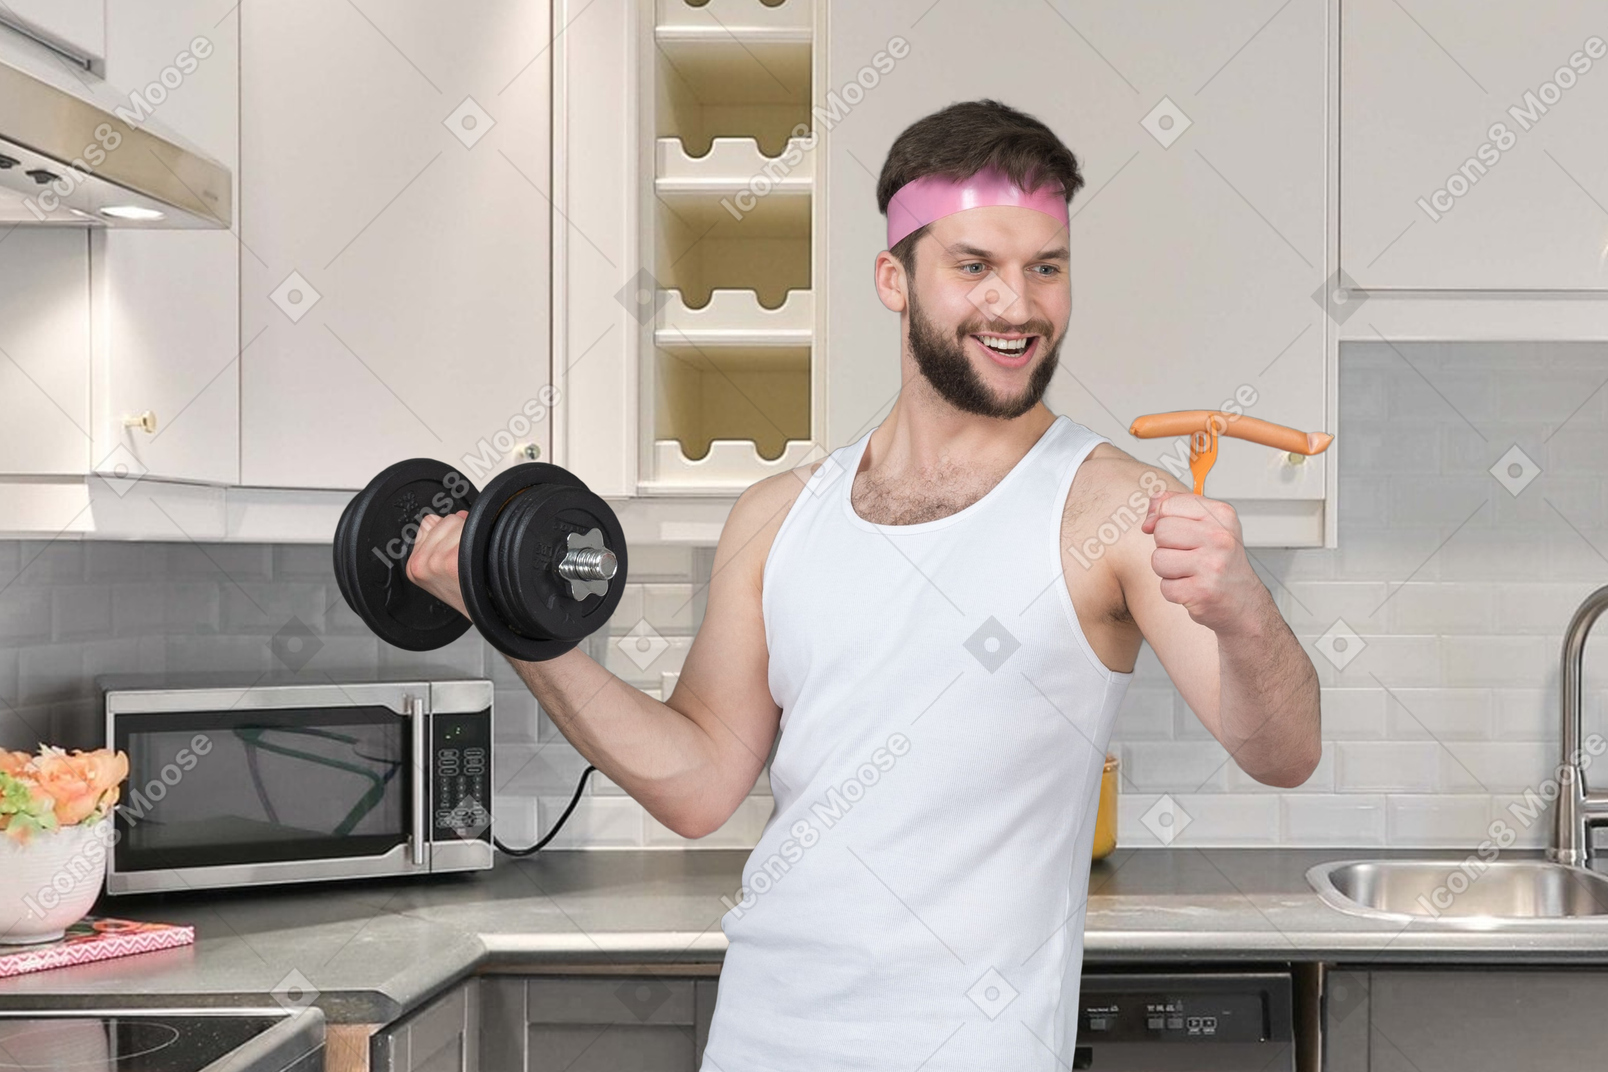 Man with dumbbells looking at sausage on fork